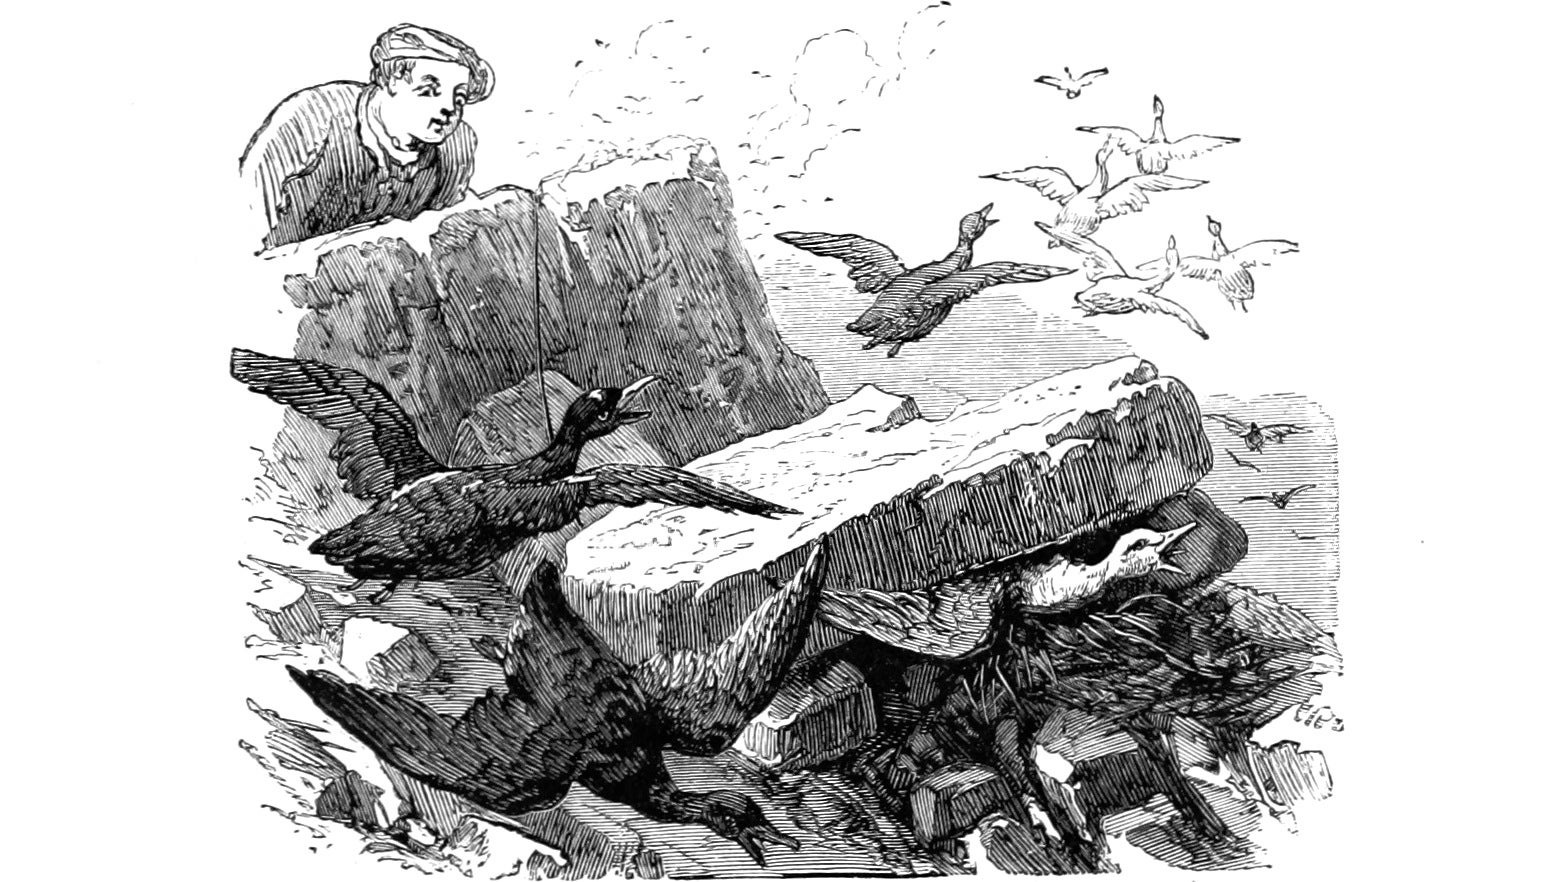 A person gazes at seabirds in an illustration from 'Perdus dans les Glaces'.